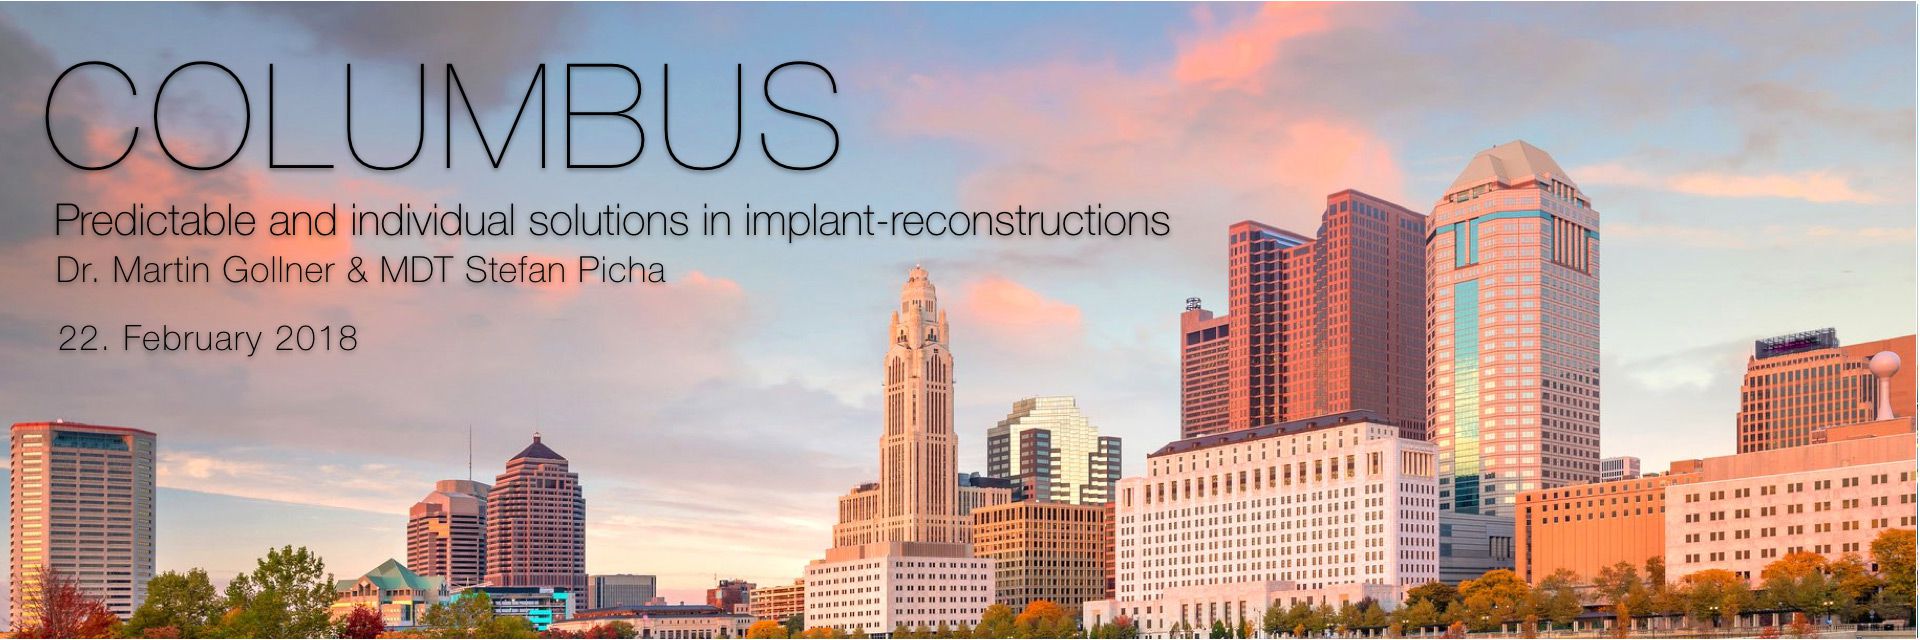 Predictable and individual solutions in implant-reconstructions - Columbus